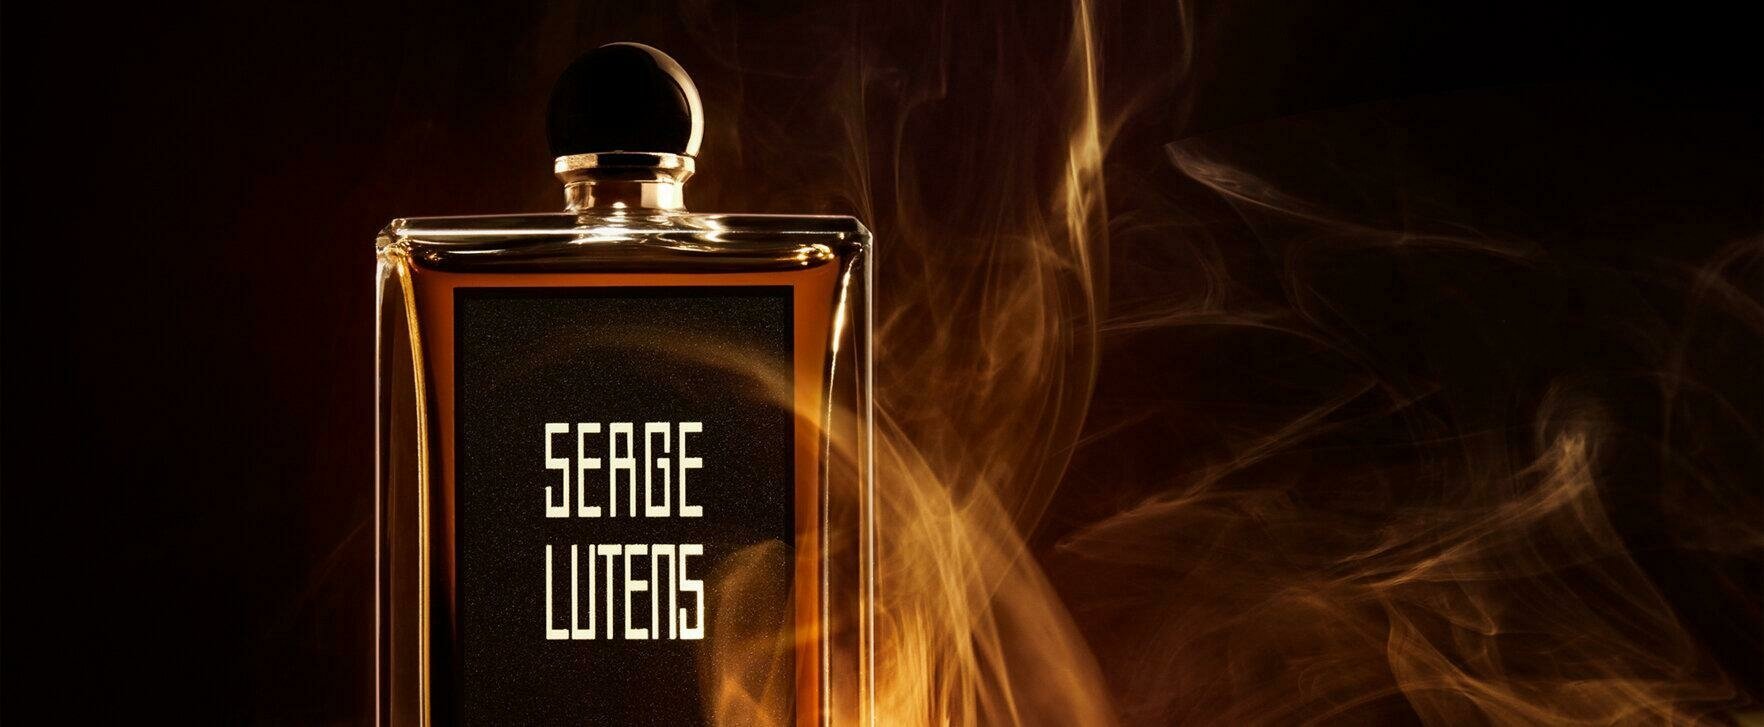 Serge Lutens’ New Unisex Fragrance: An Ode to the Luxury and Excess of Life